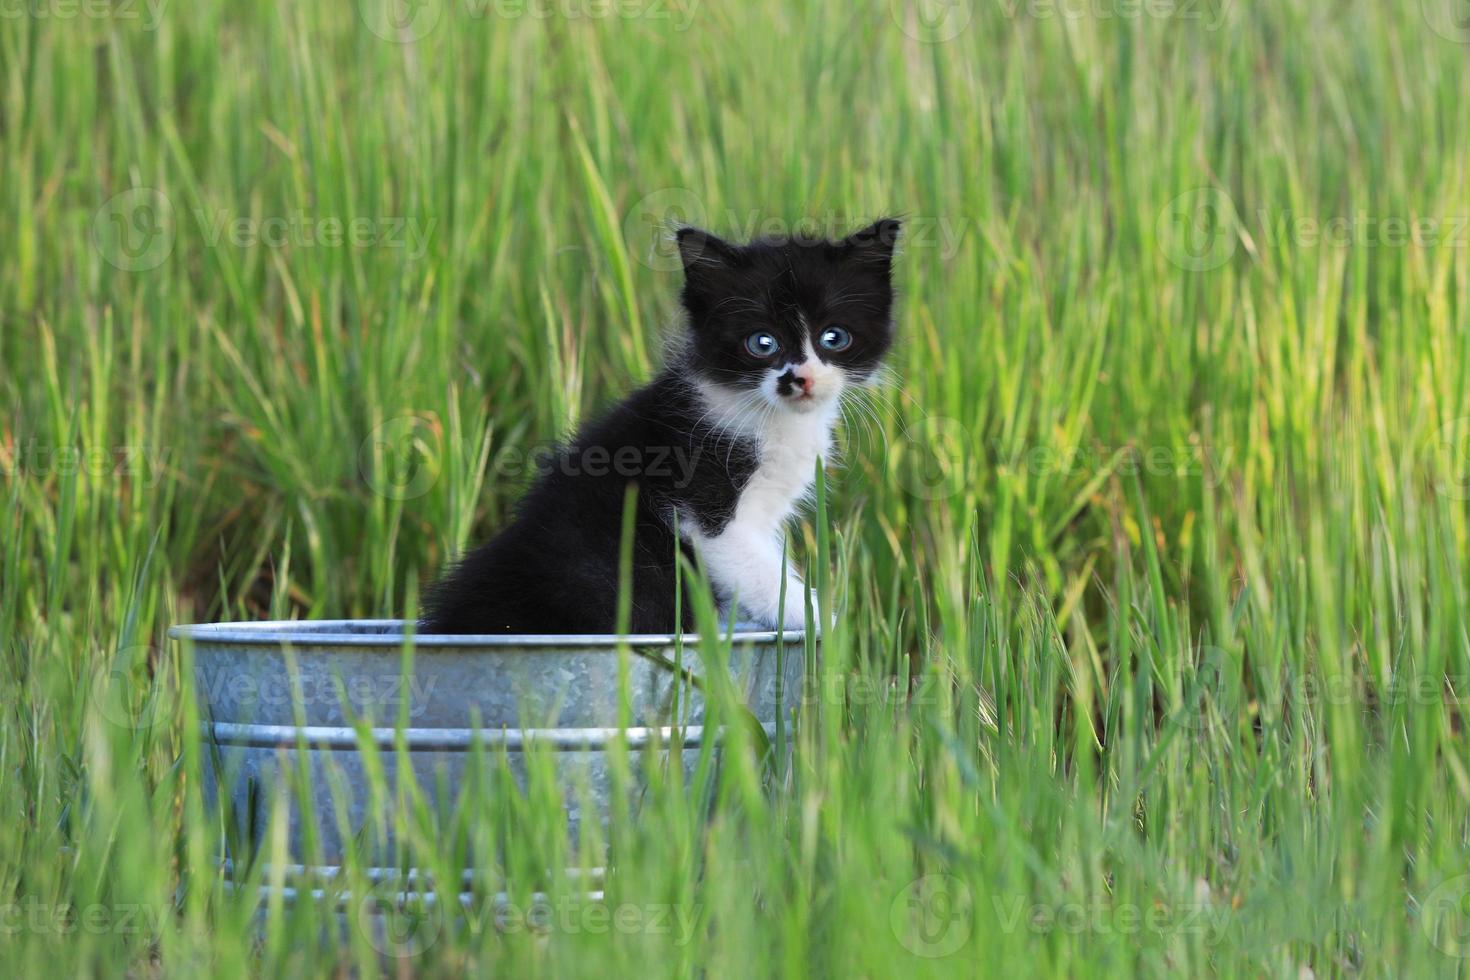 Kitten Outdoors in Green Tall Grass on a Sunny Day photo